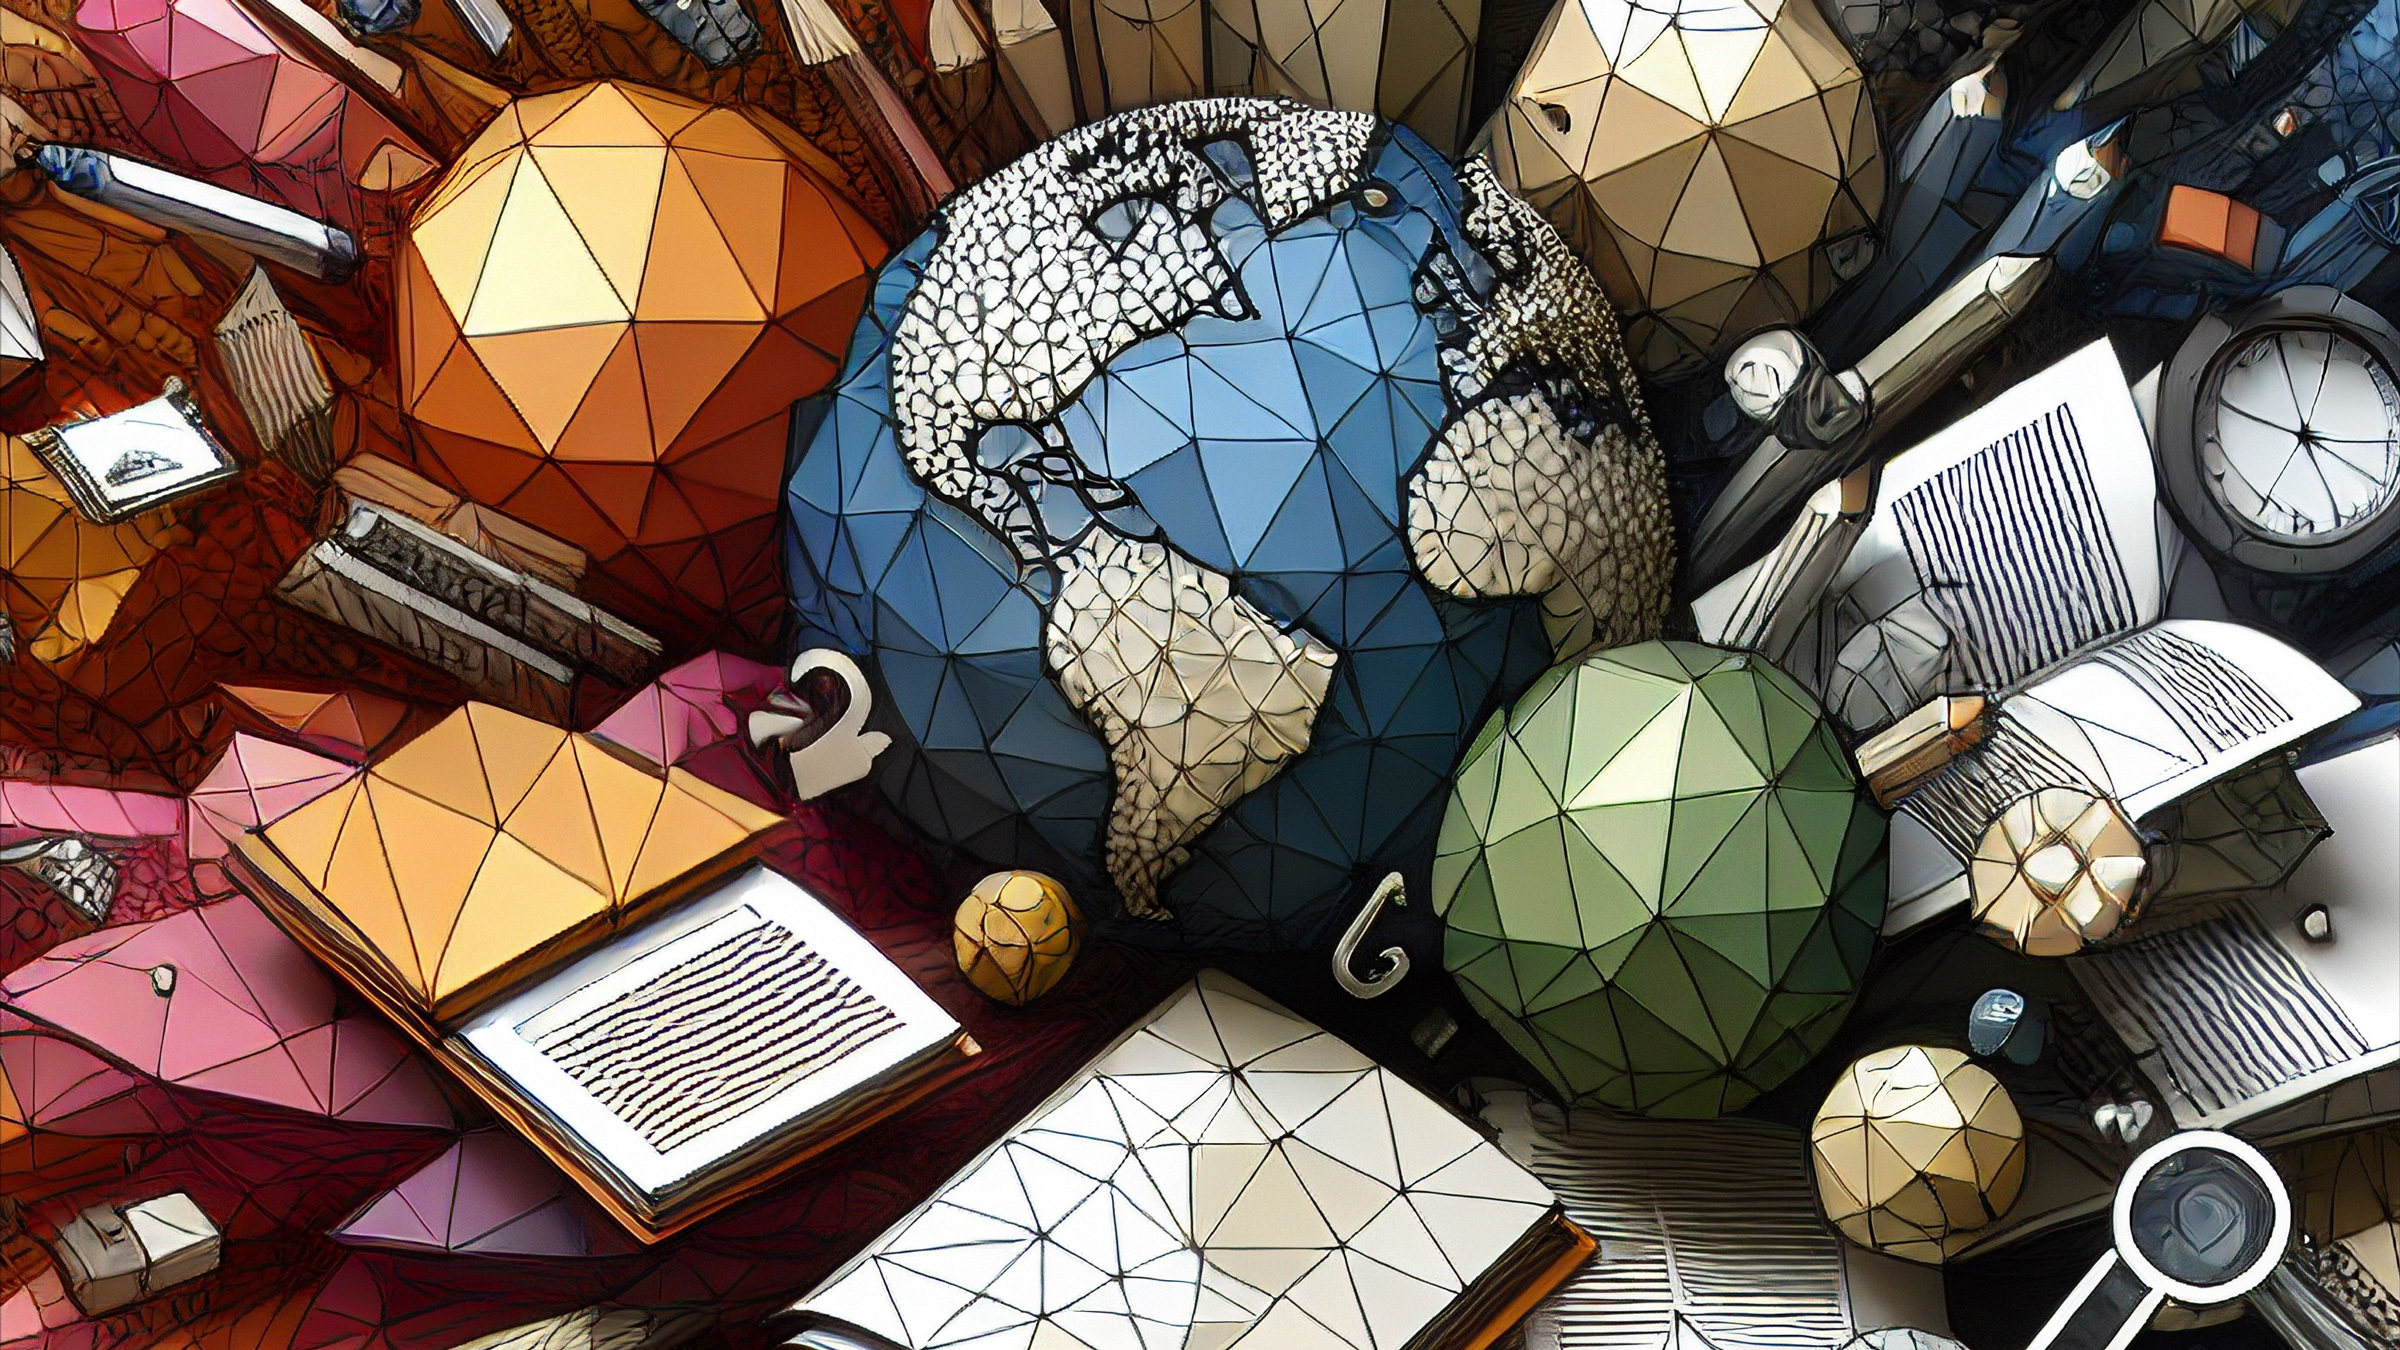 globe amidst books, pencils, and other items, illustration